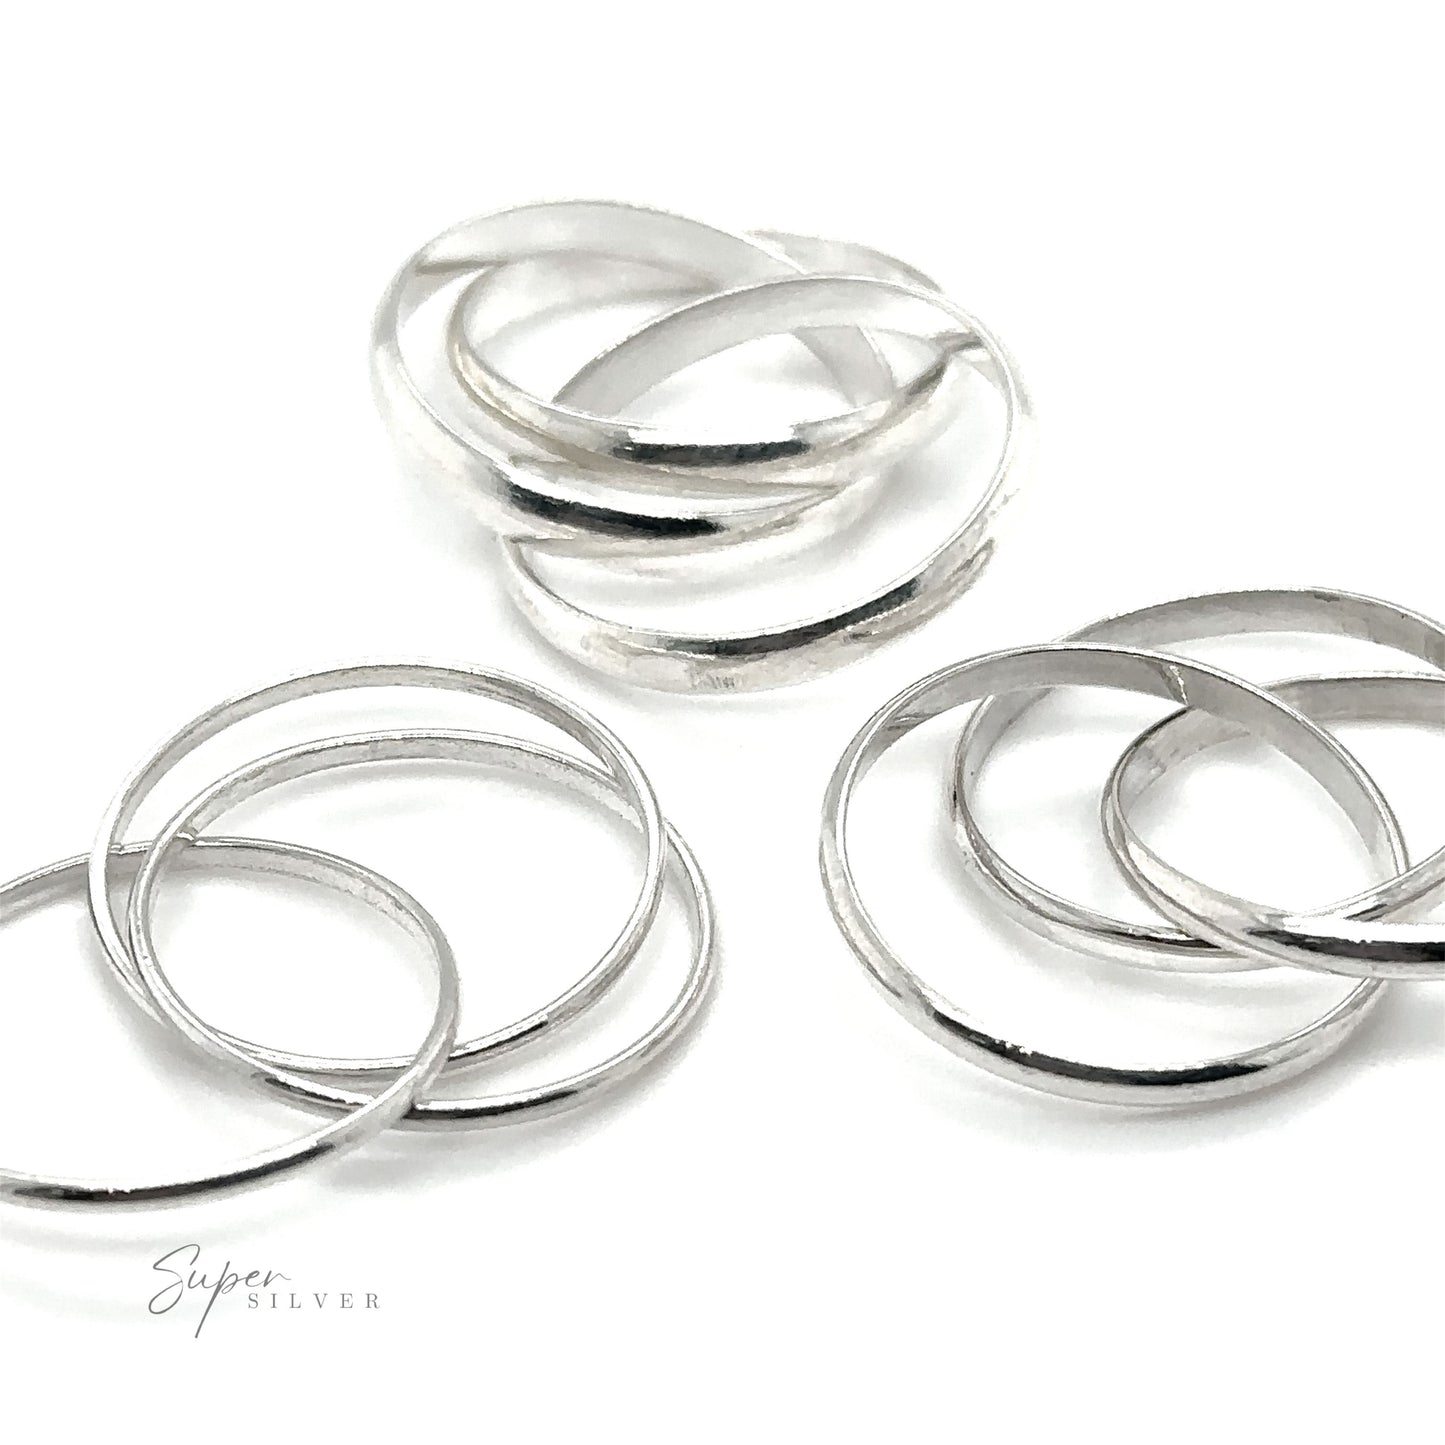 A trio of Three Ring Rolling Bands on a white surface, each displaying powerful symbolism.